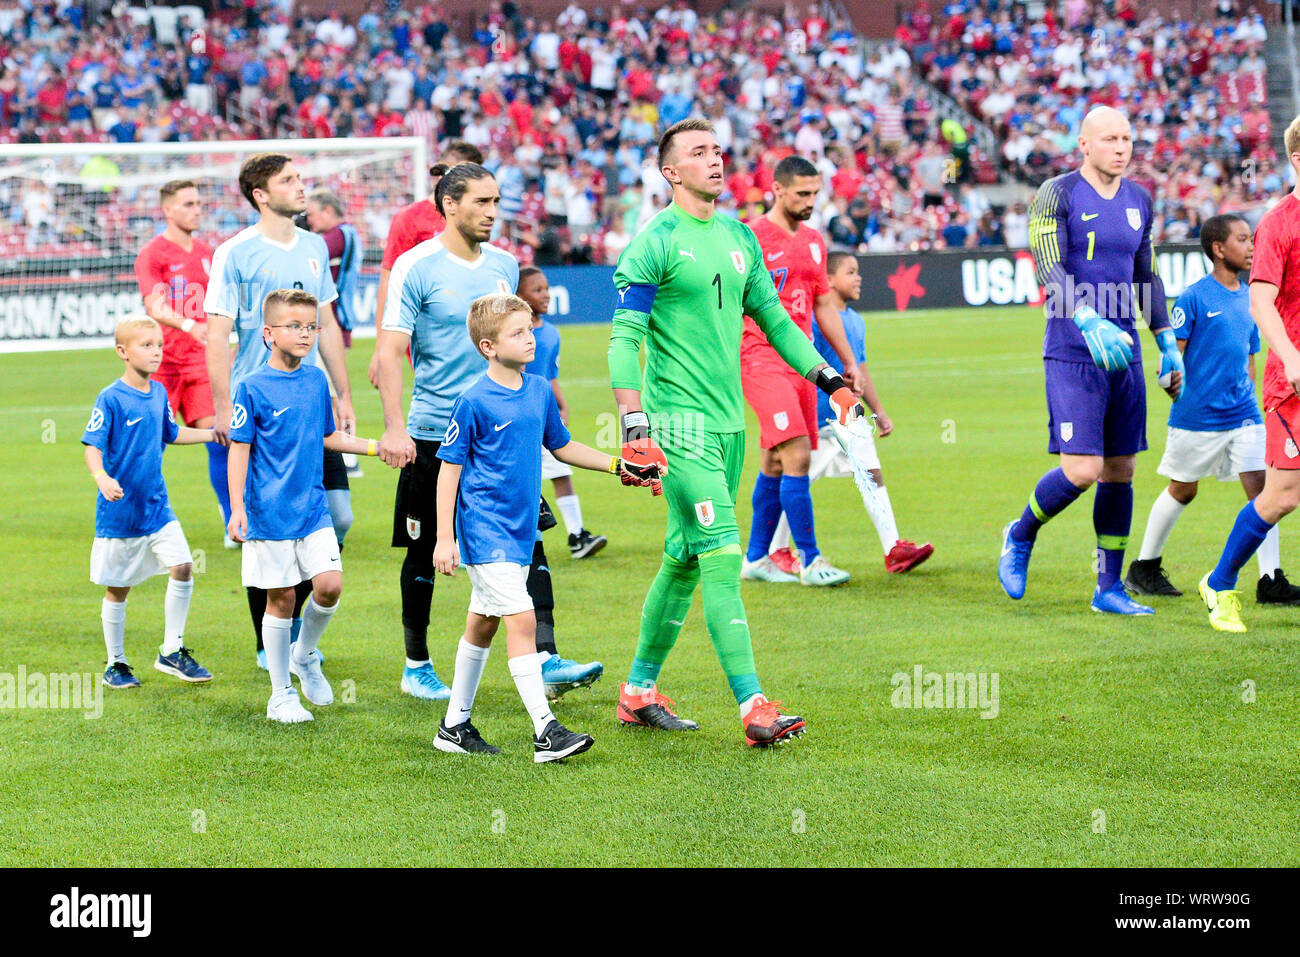 St. Louis, Missouri, USA. 10th Sep, 2019. Players take the field with their escorts for introductions during the final match before the Concacaf Nations League as the United States Men's National Team hosted Uruguay at Busch Stadium in St. Louis City, MO Ulreich/CSM/Alamy Live News Stock Photo